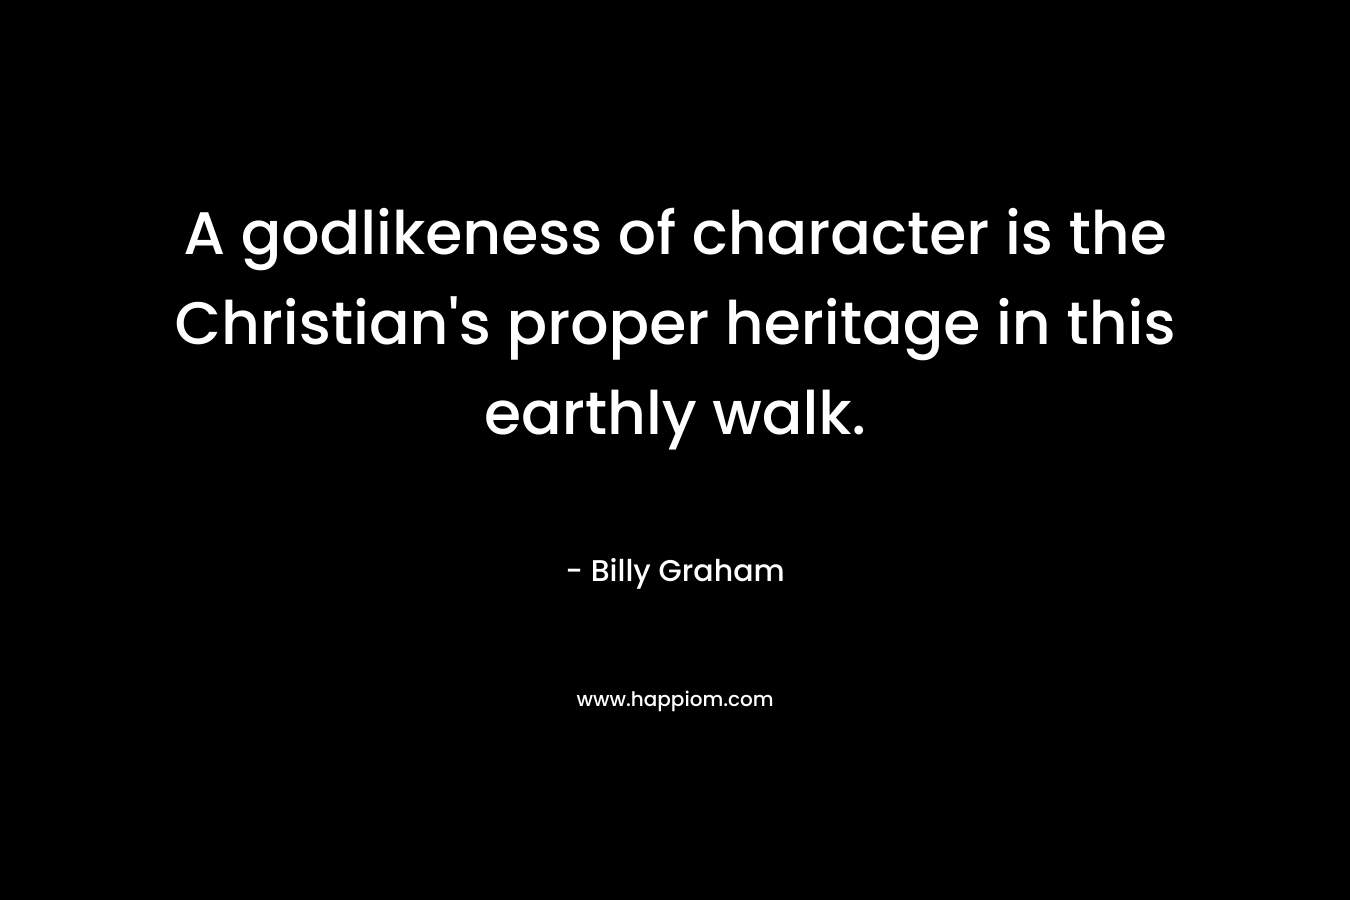 A godlikeness of character is the Christian's proper heritage in this earthly walk.